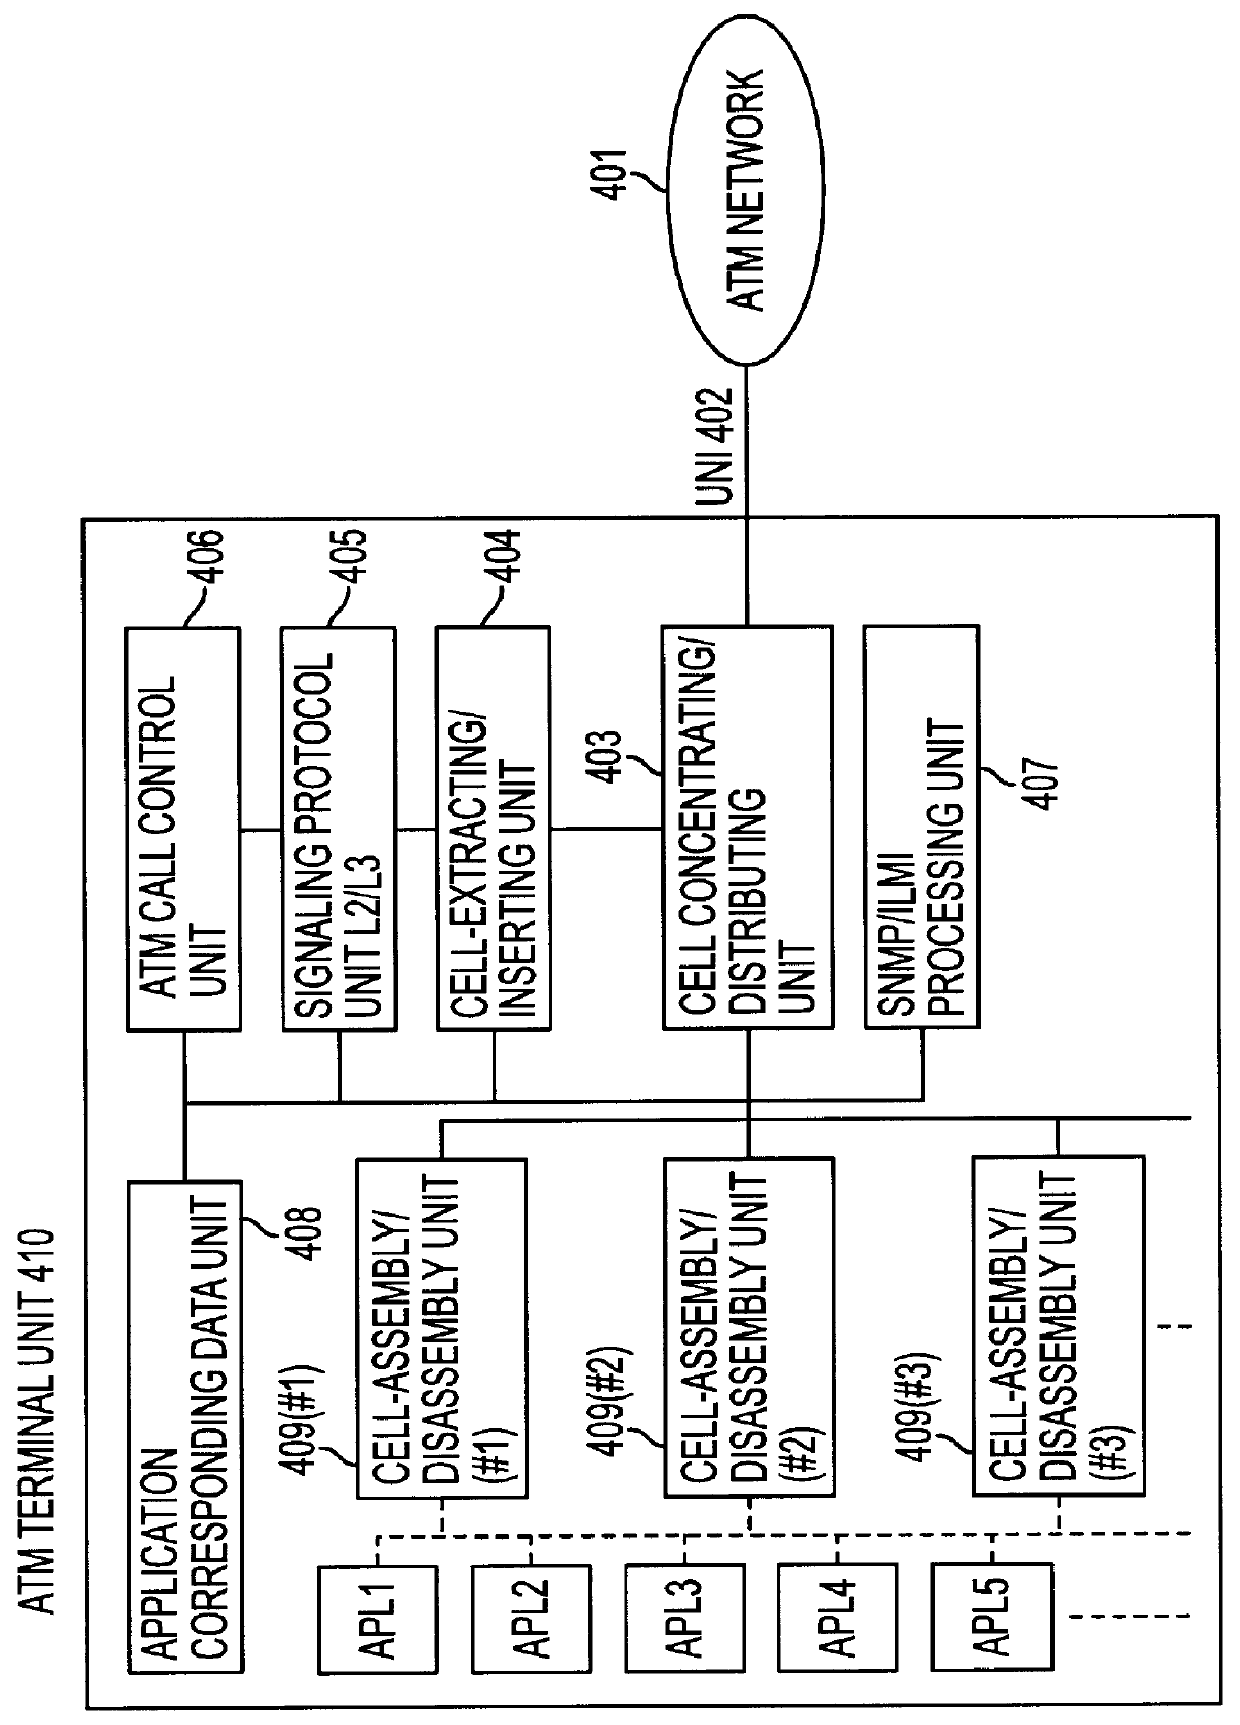 Method and apparatus for negotiating connection identifier